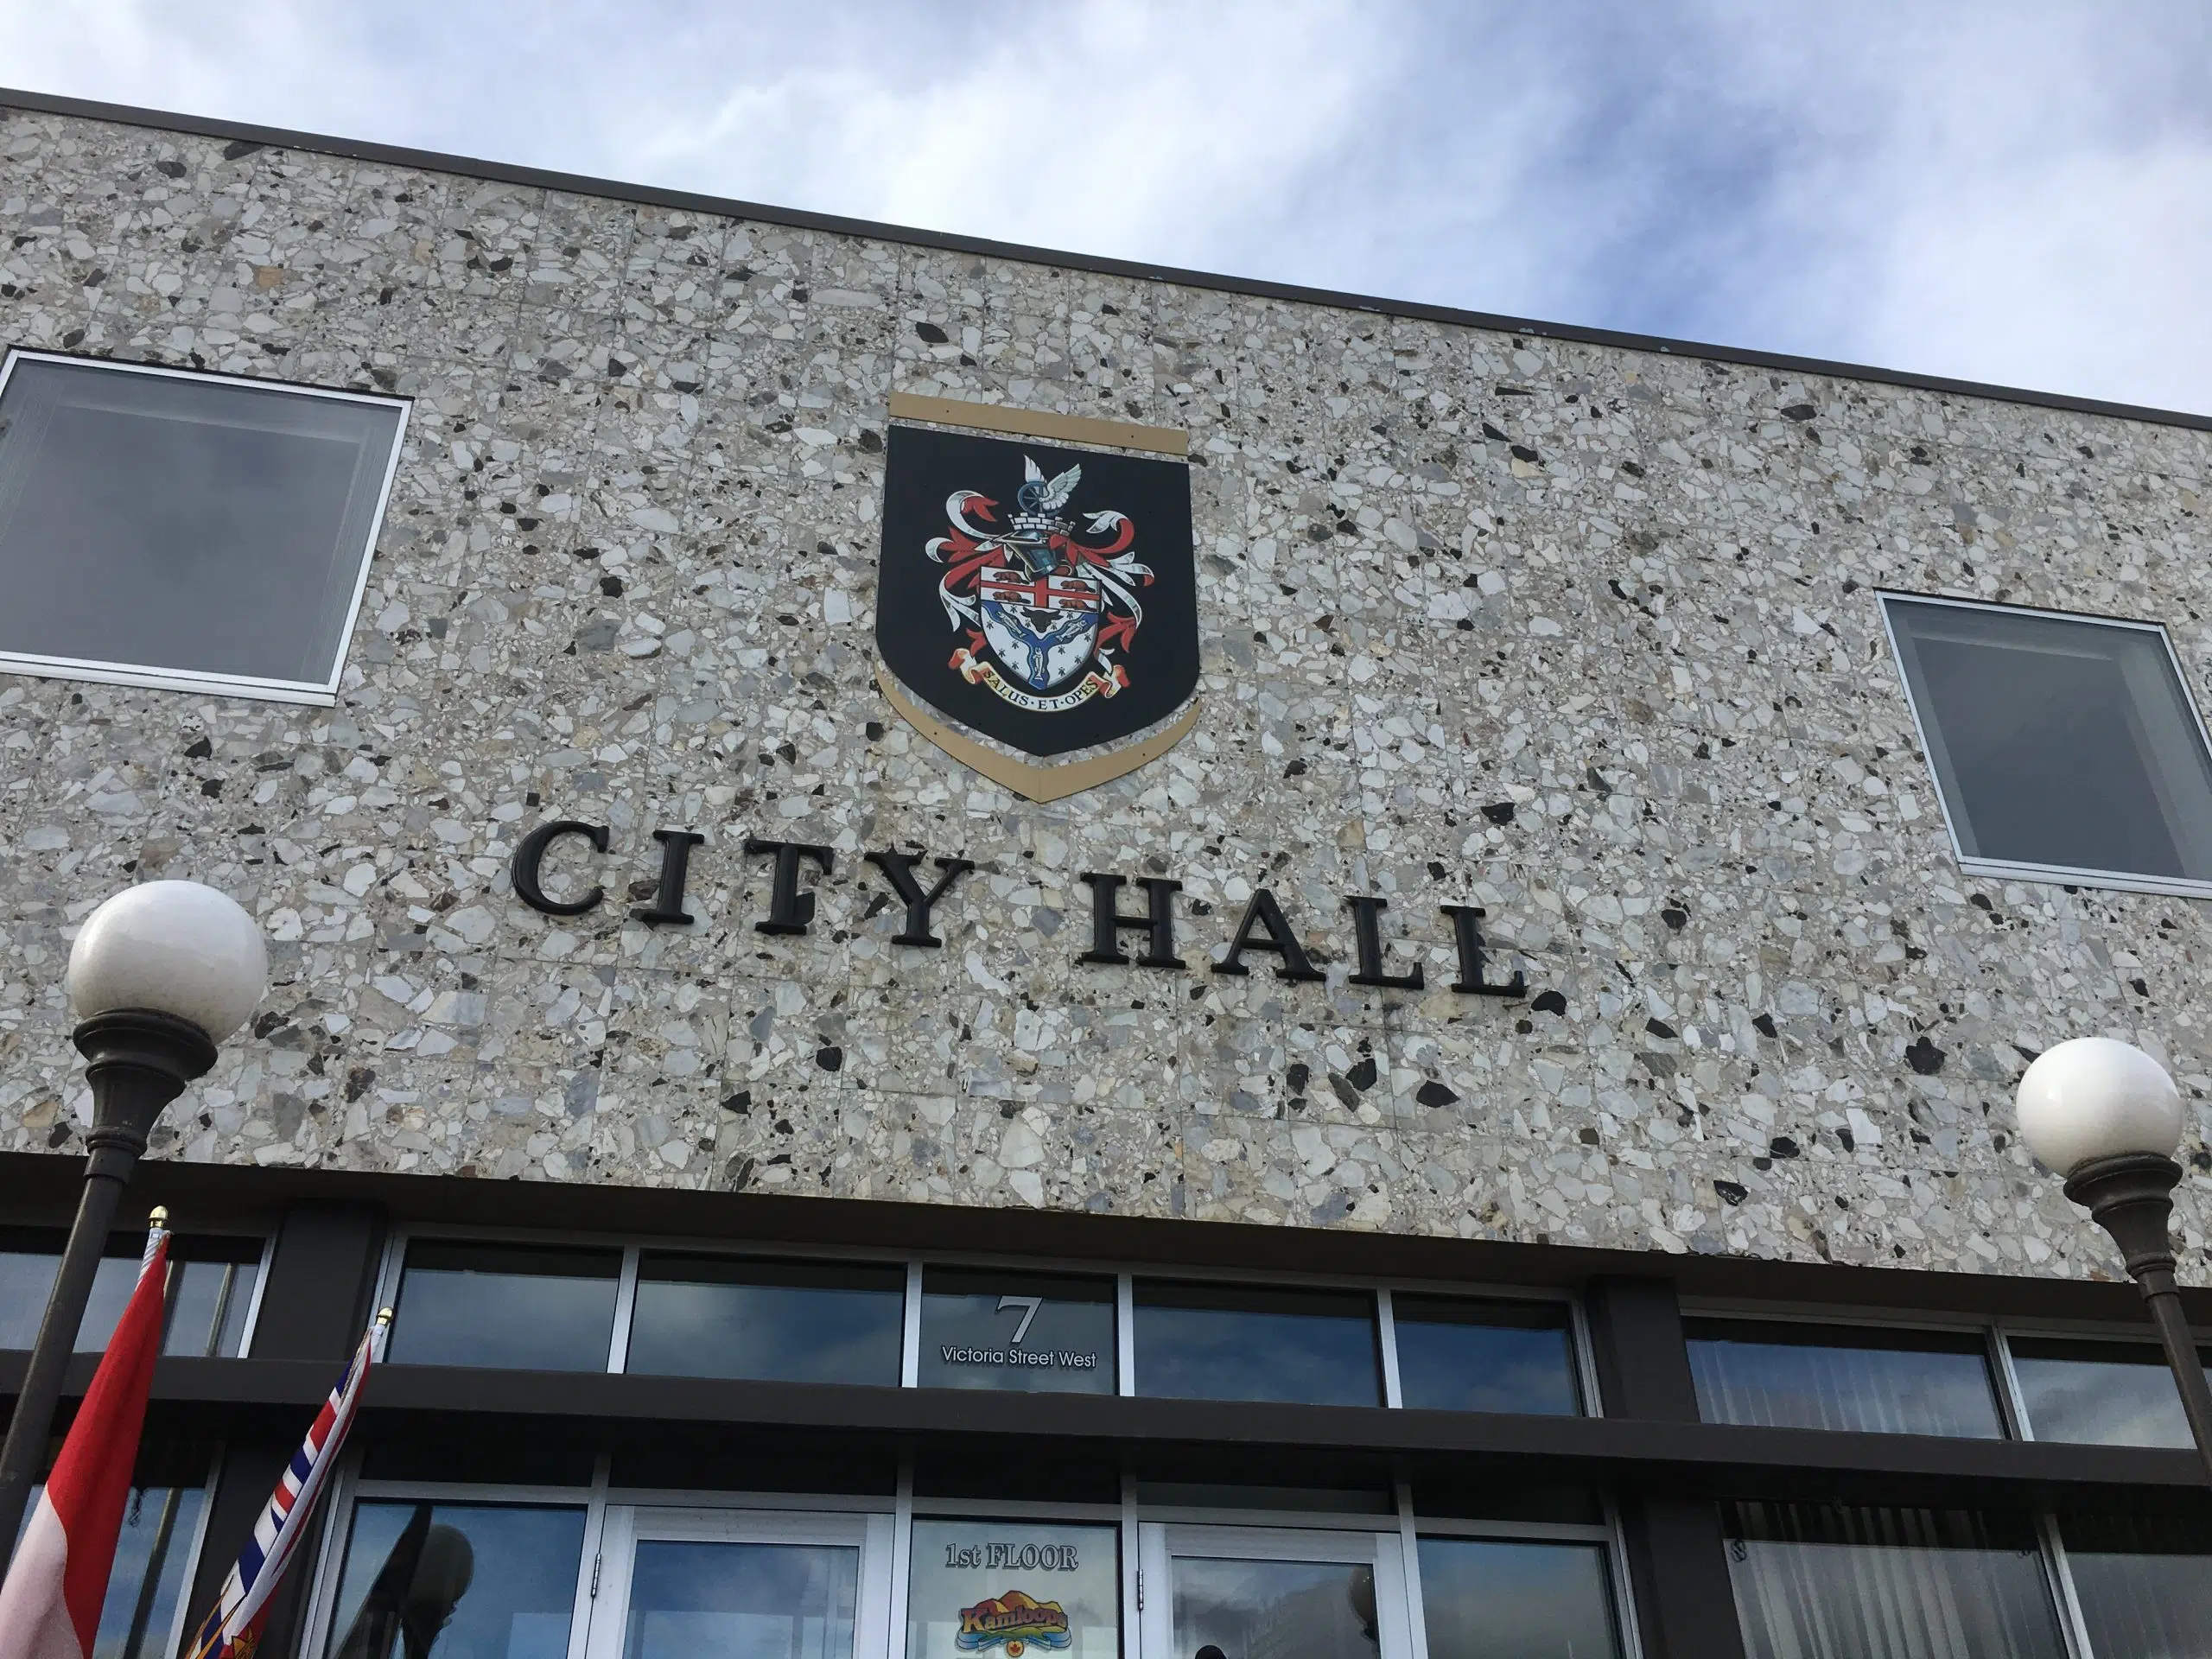 Kamloops Council says no to Dallas area gravel pit proposal